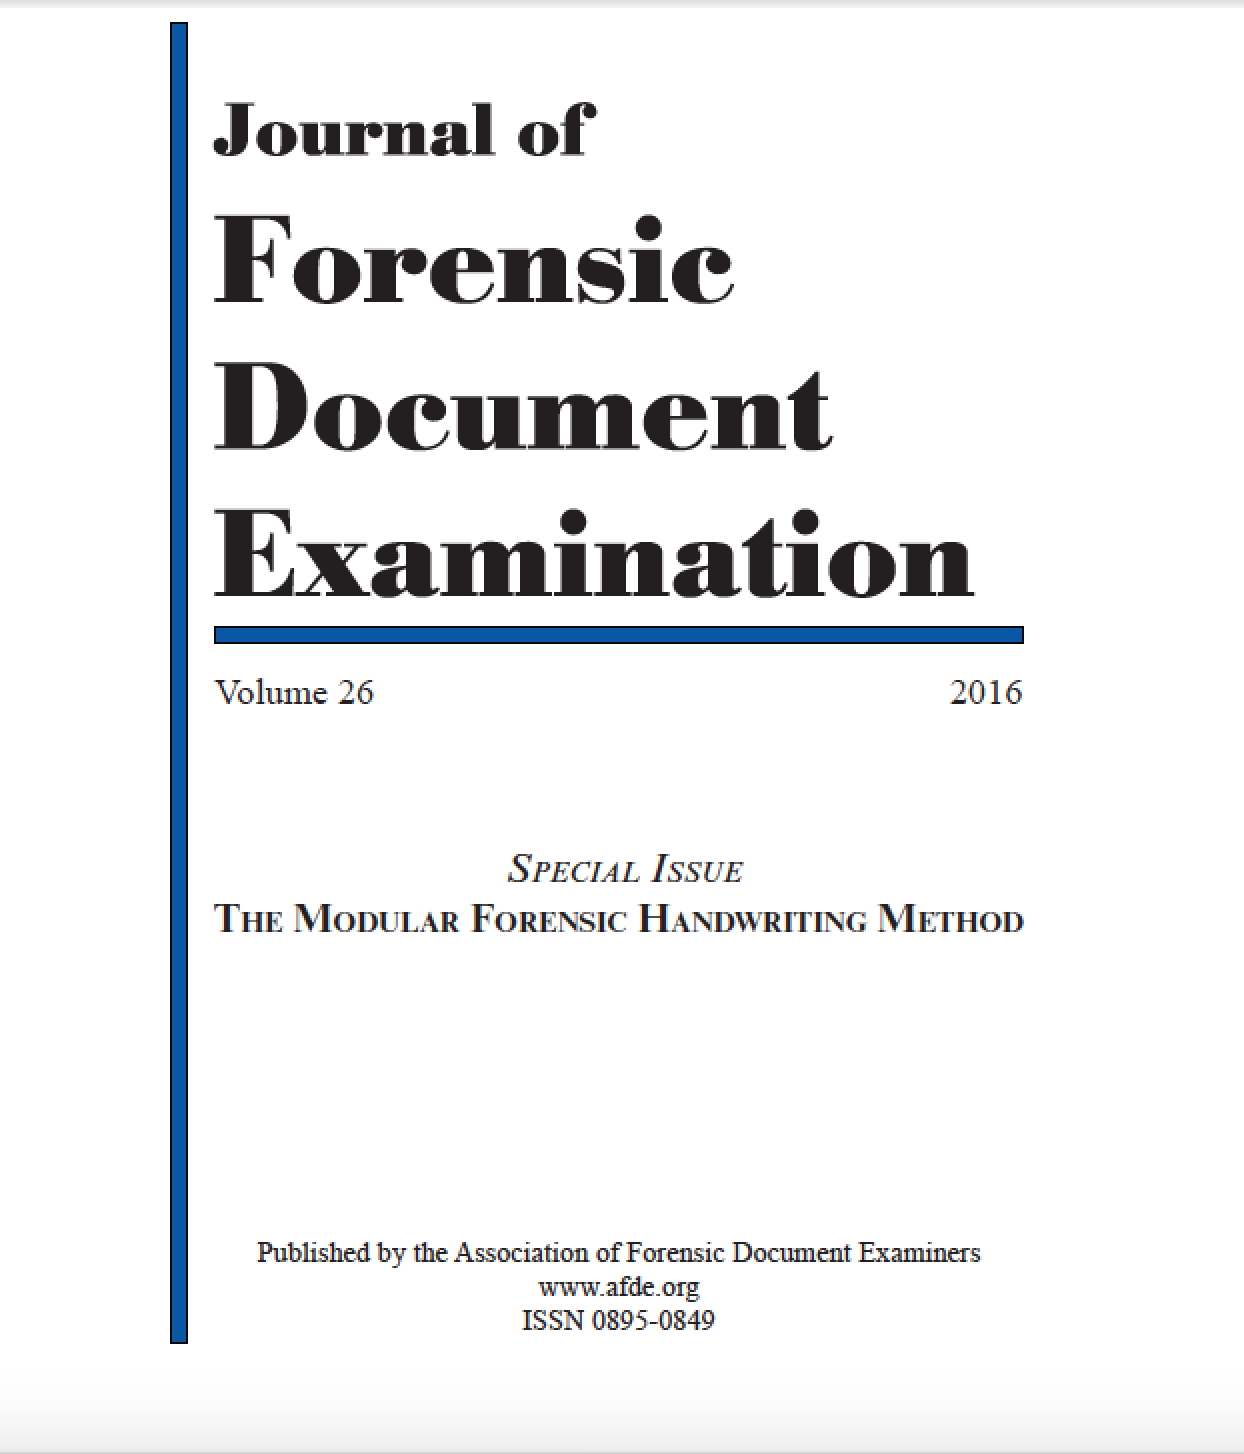 					View Vol. 26 (2016): Special Issue - The Modular Forensic Handwriting Method
				